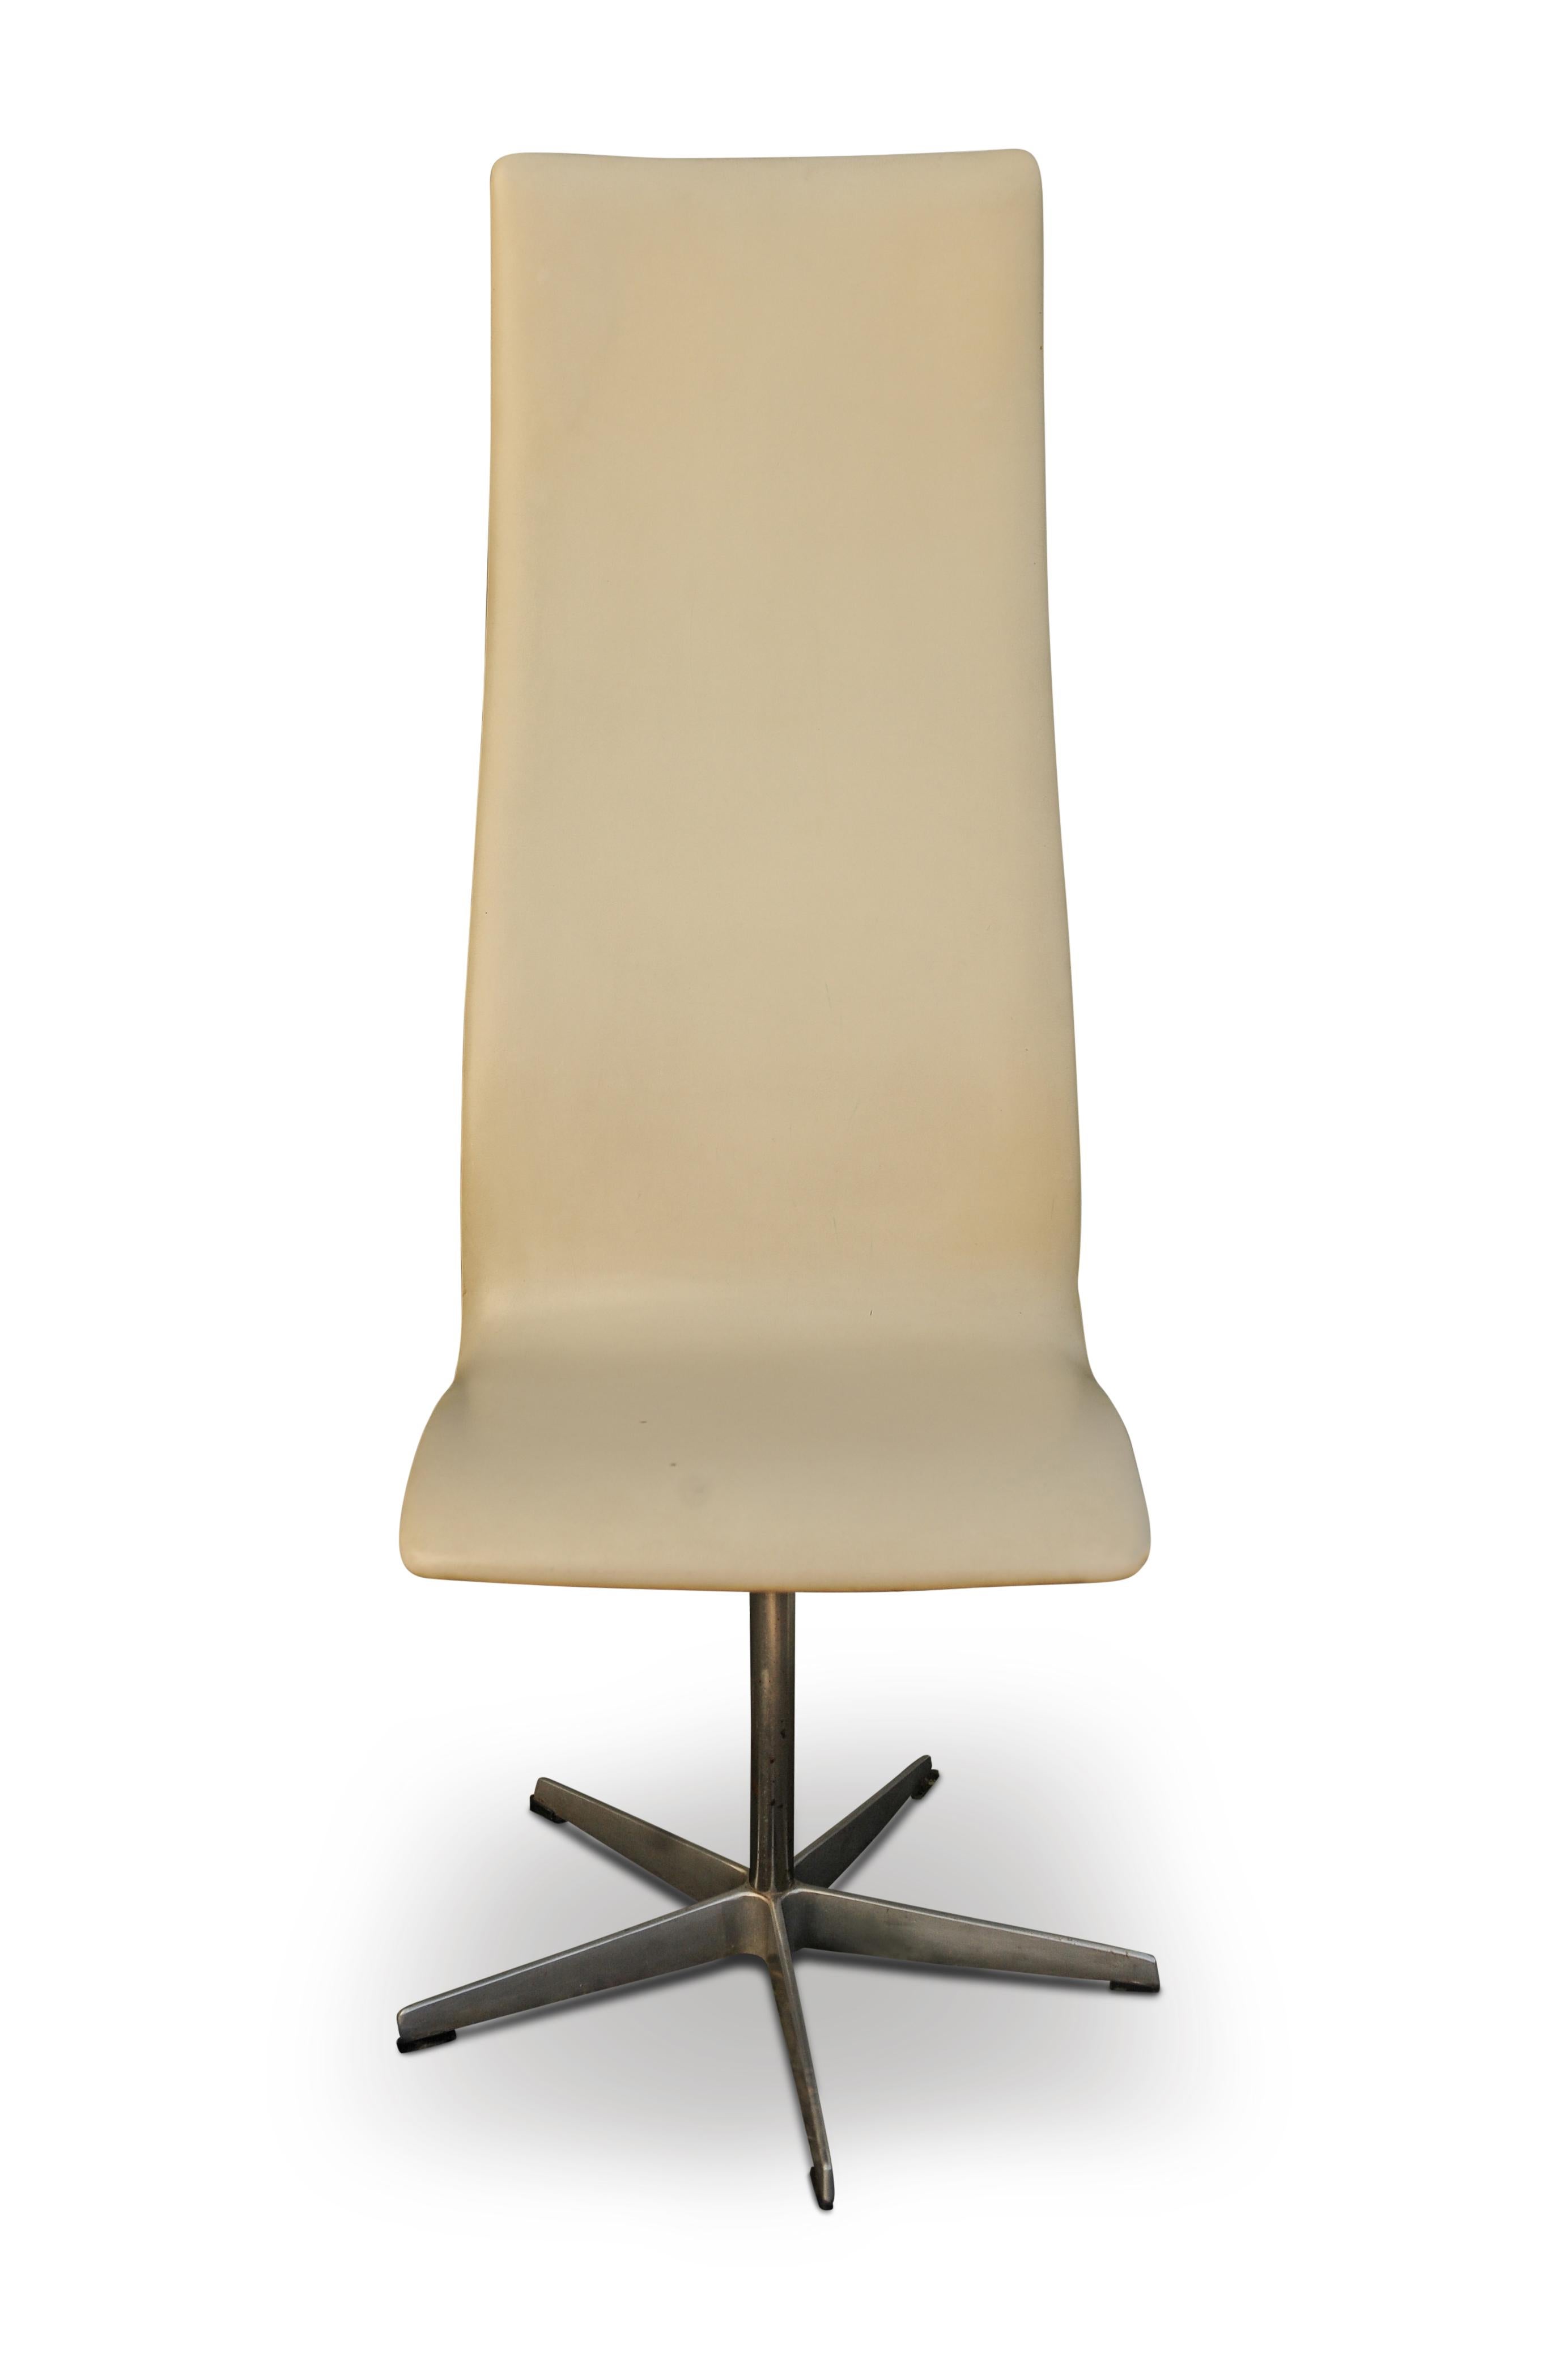 Original design by Arne Jacobsen (1902-1971) for Fritz Hansen.
An original off-white leather and brushed aluminum framed swivel Oxford chair, having cream leather padded upholstery, raised on five-spoke base, labelled to underside.

Stamped and